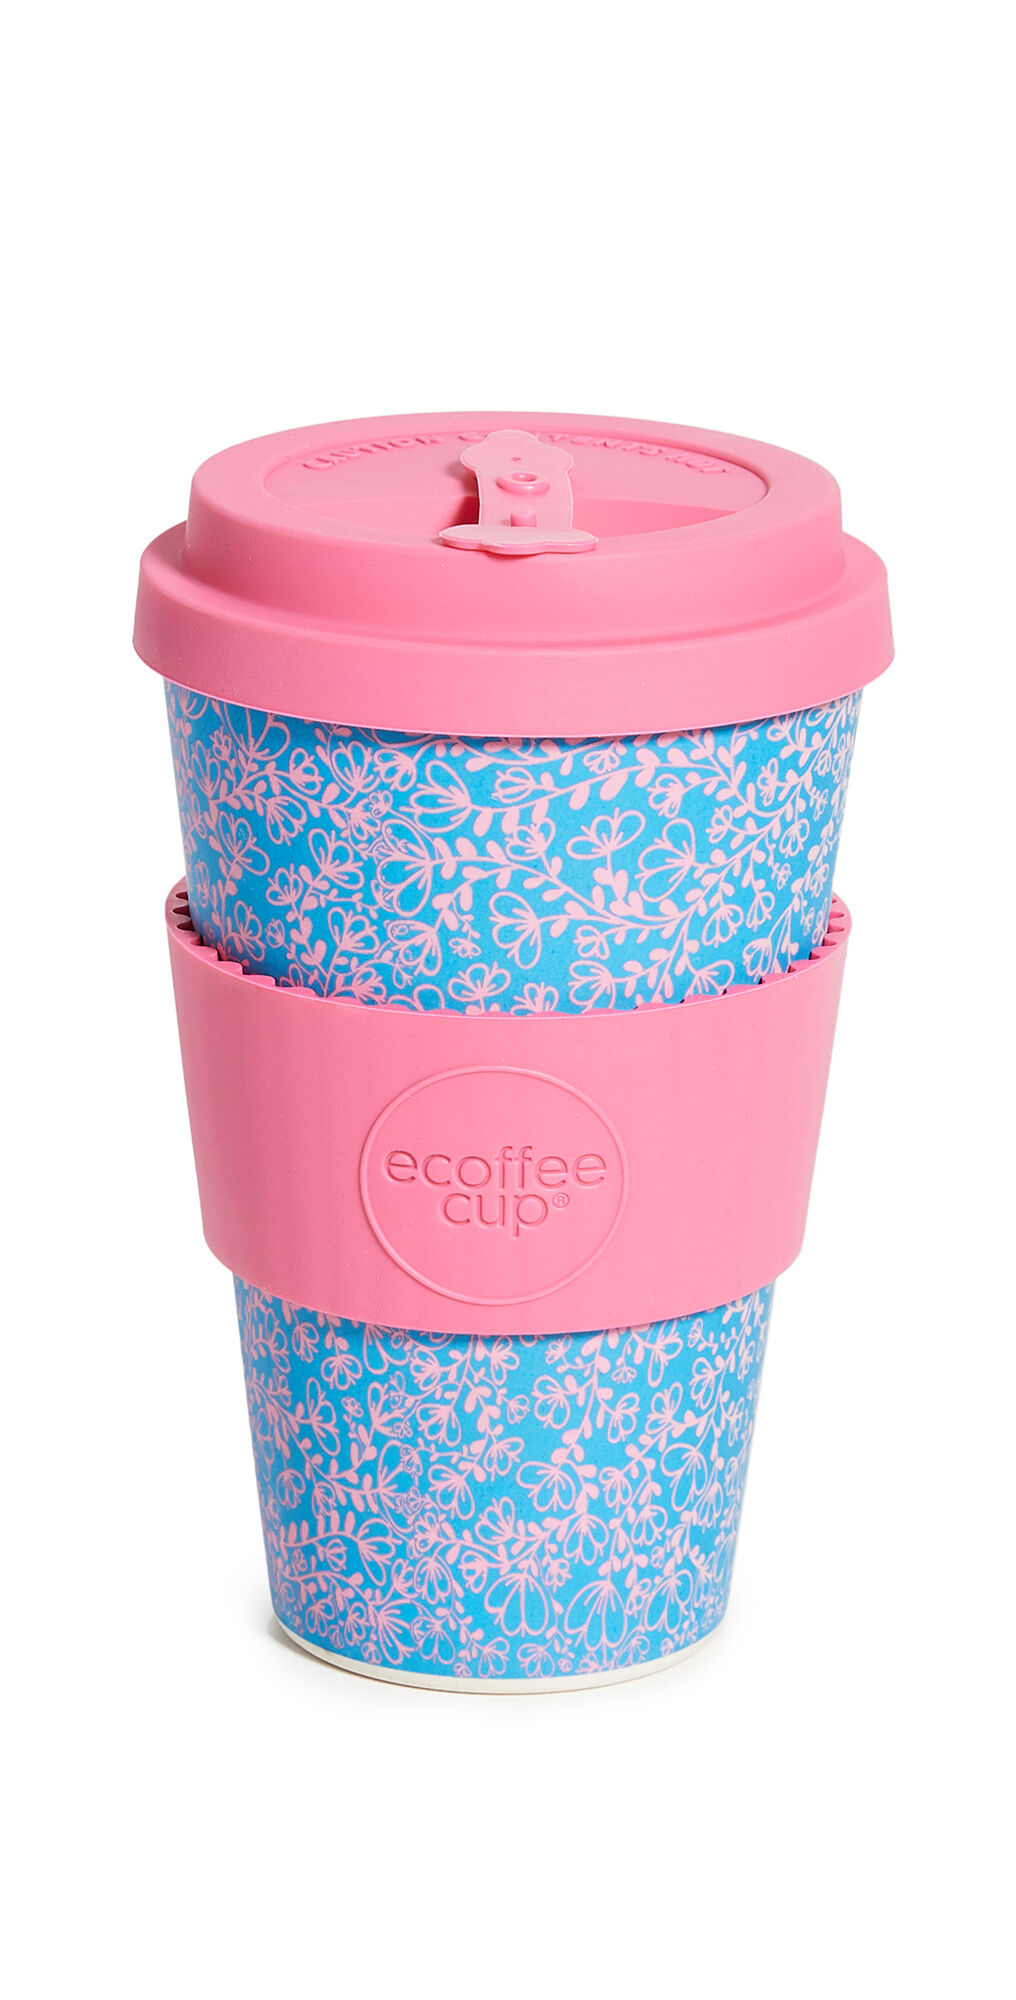 Shopbop Home Shopbop @Home 14oz Reuseable Coffee Cup Miscoso Dolce One Size  Miscoso Dolce  size:One Size